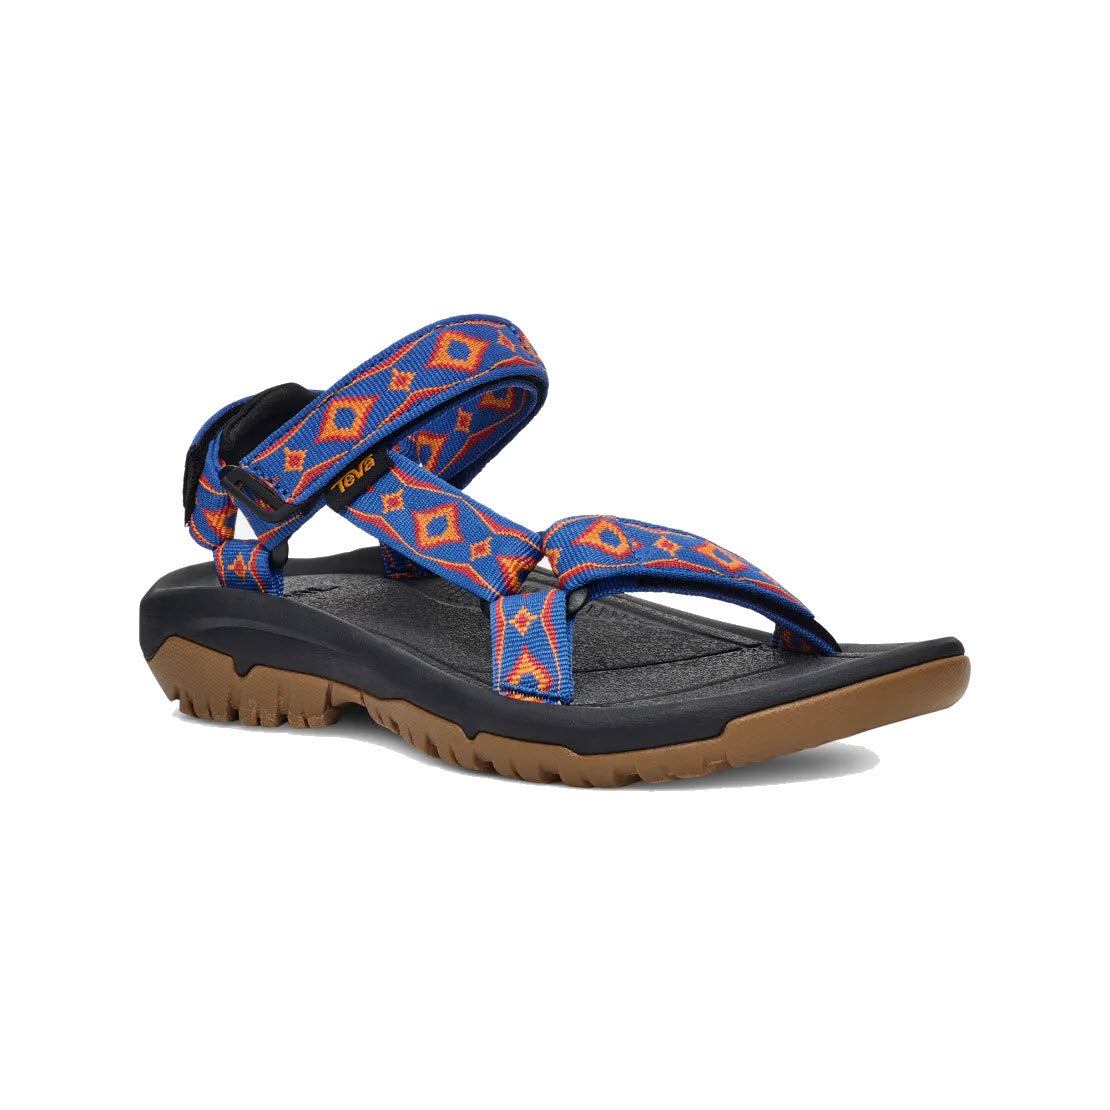 A single Teva TEVA HURRICANE XLT2 90S ARCHIVAL REVIVAL - WOMENS sandal with blue and orange heritage strap designs and a black footbed on a white background.